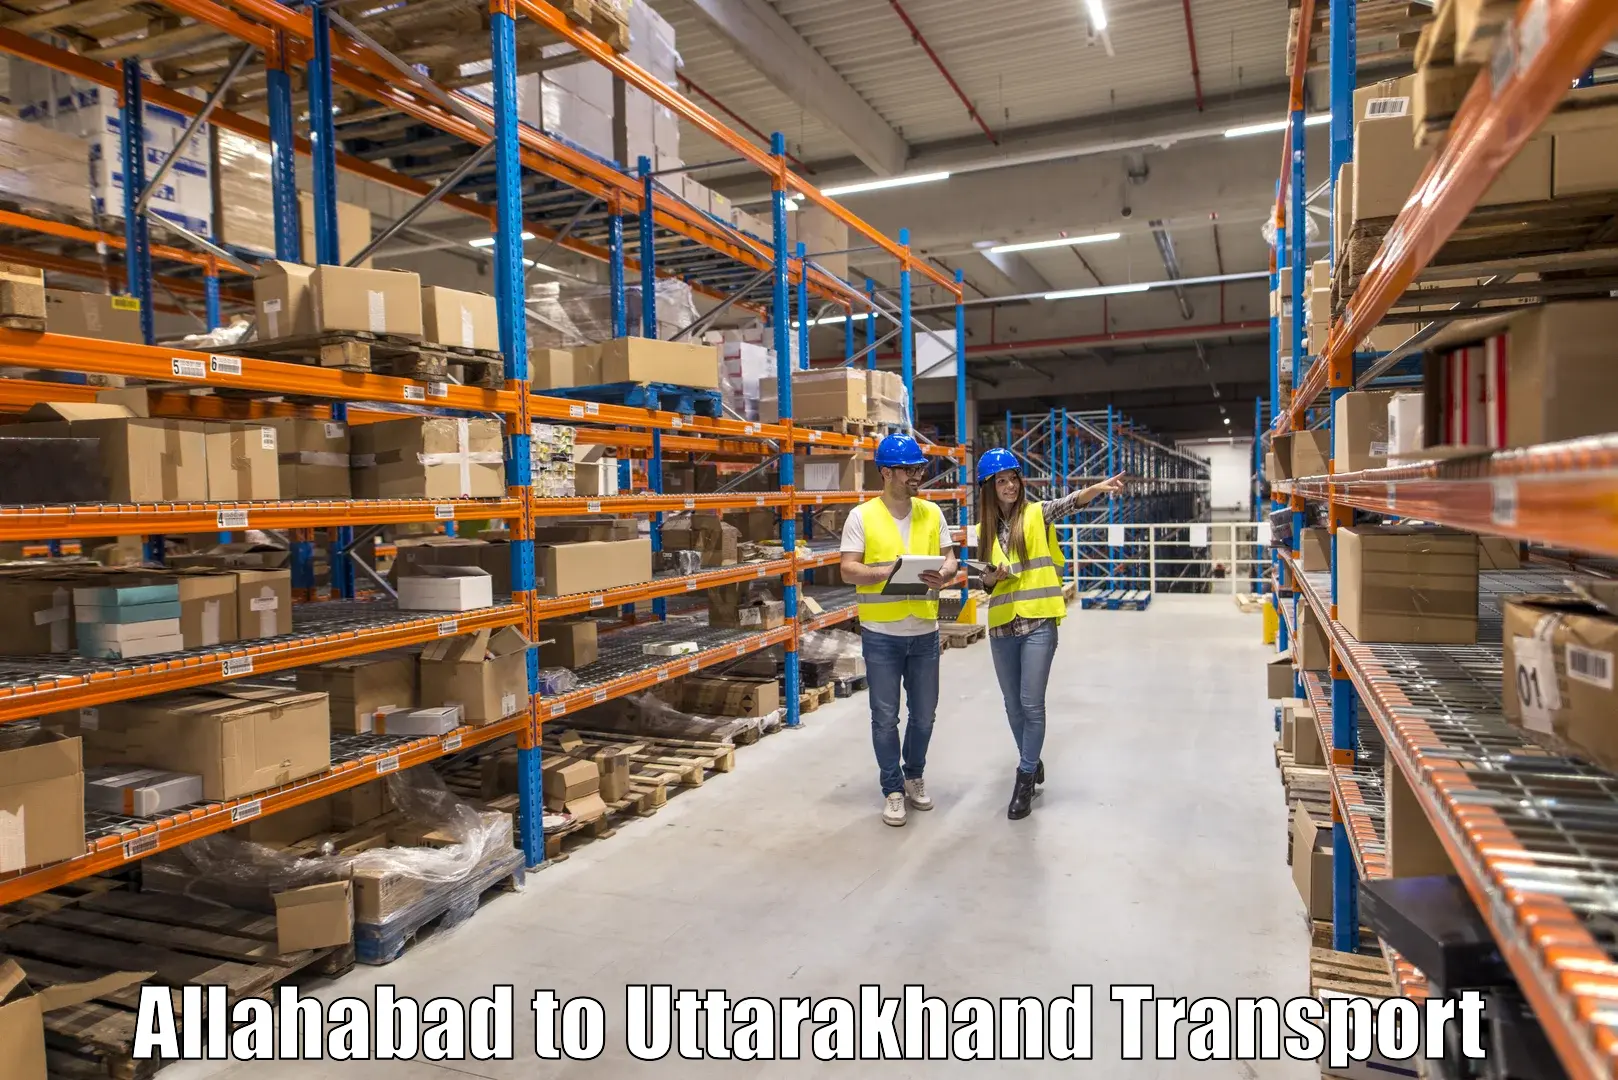 Truck transport companies in India Allahabad to Lansdowne